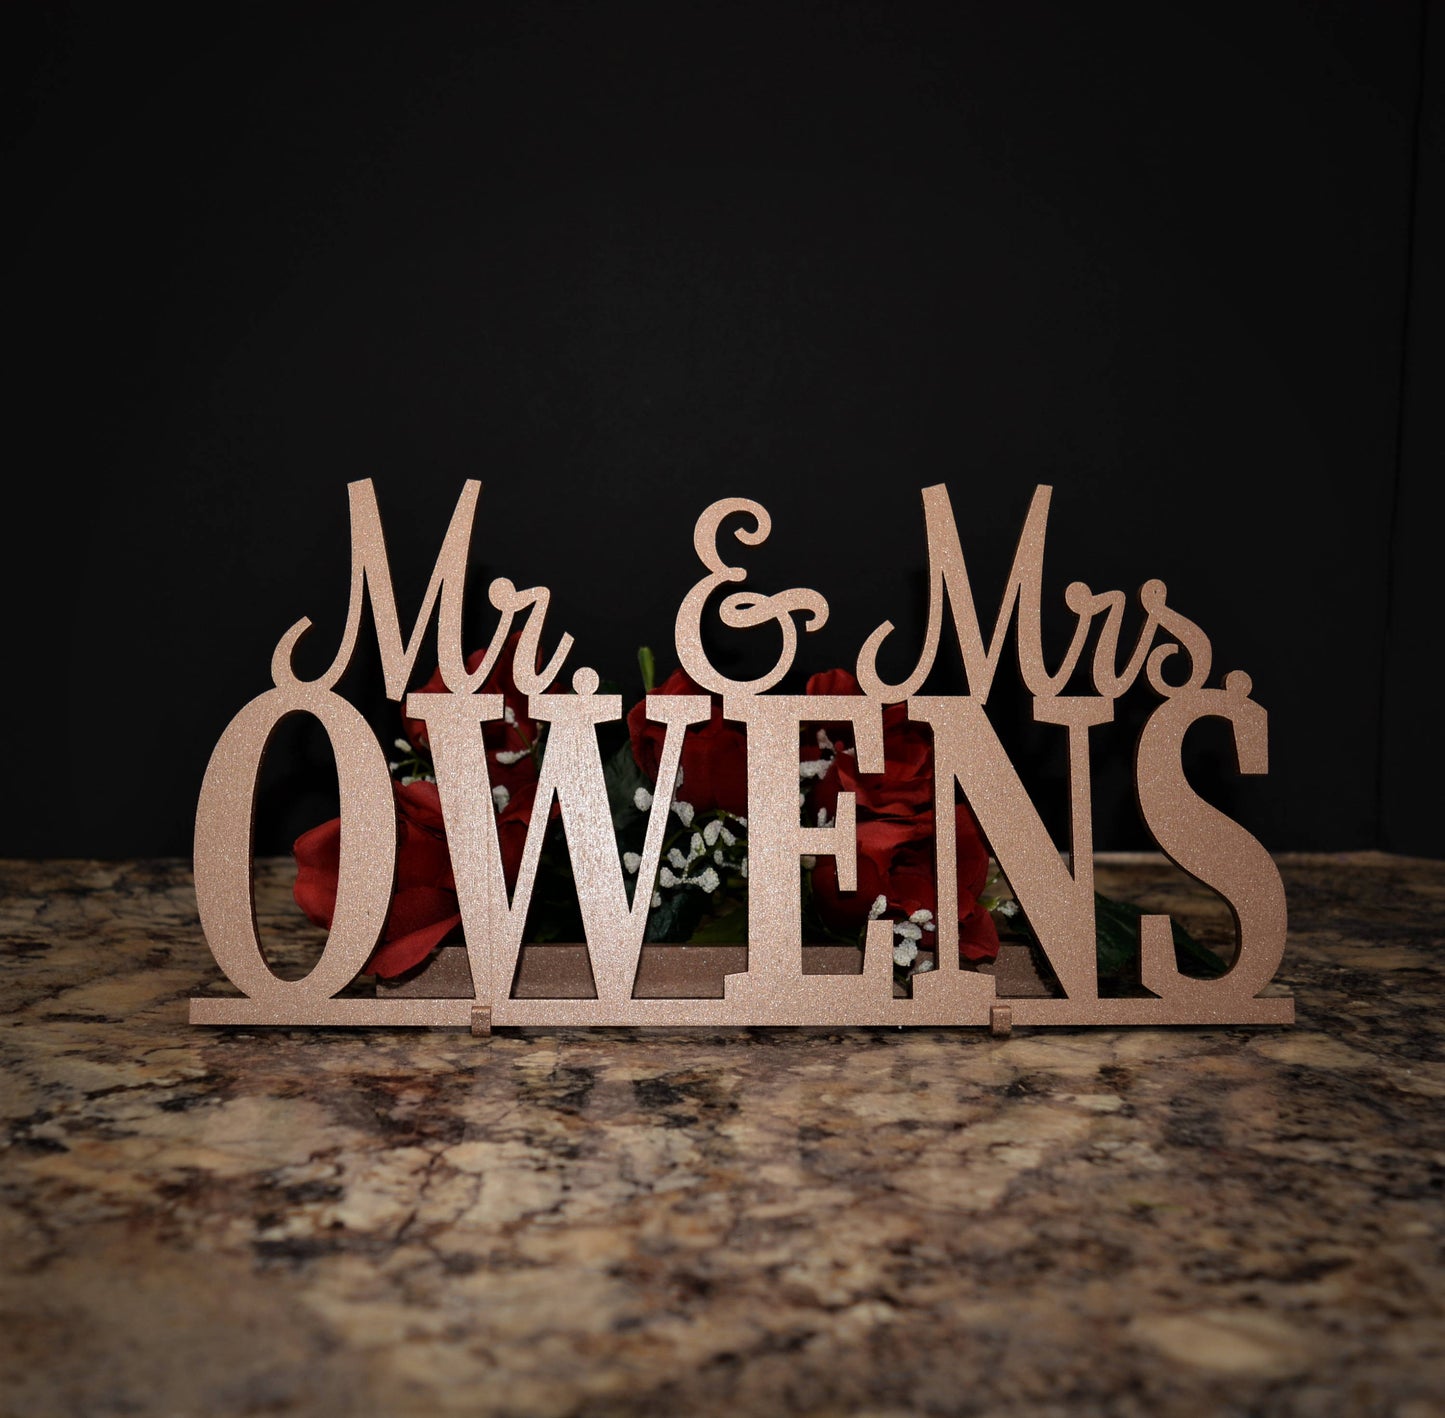 Wedding Name Sign - Mr and Mrs Sign - Custom Name sign - Mr & Mrs Wood Name - Personalized Last Name Sign - Cake Table Sign Centerpiece Name